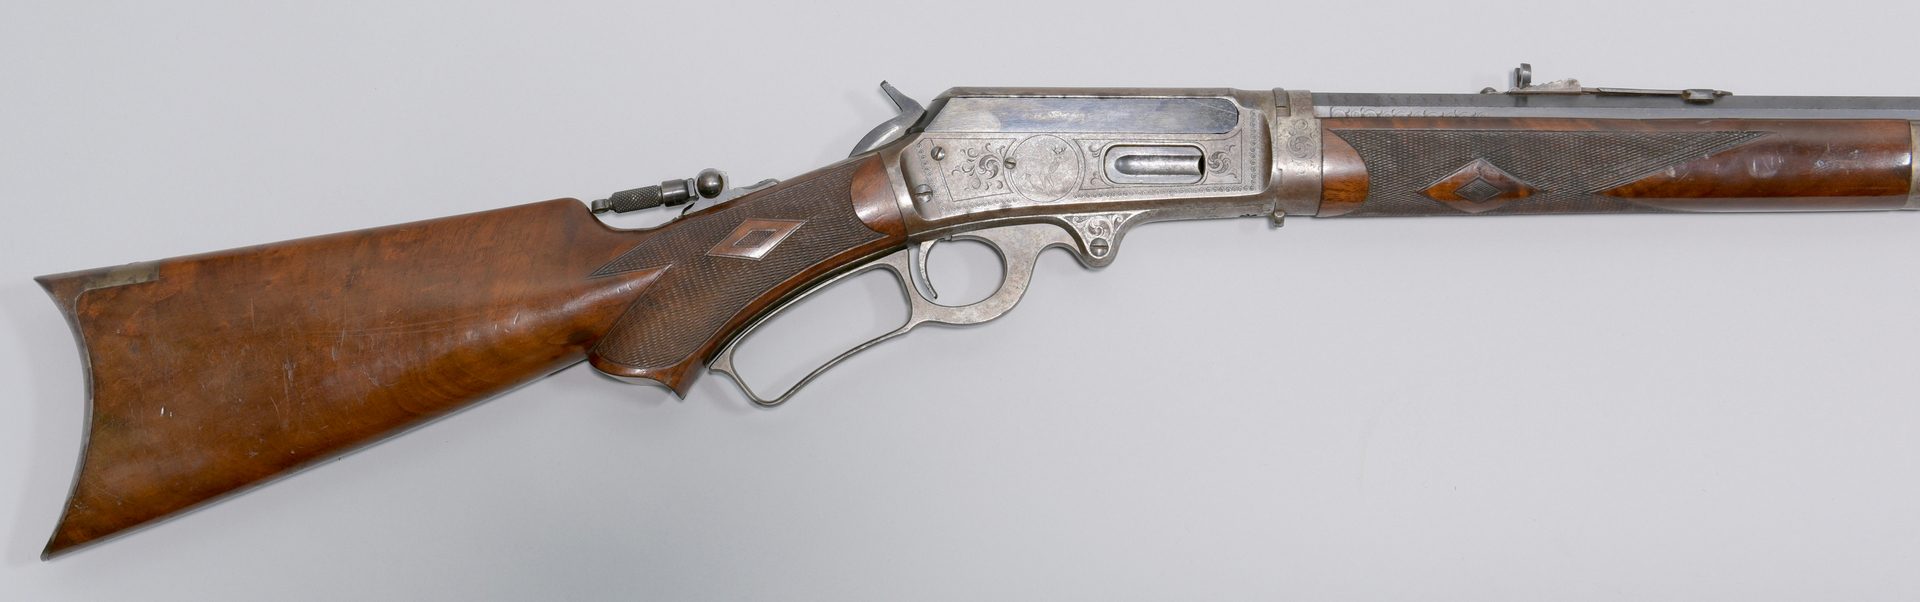 Lot 307: Marlin Special Order Deluxe Rifle, Model 1893